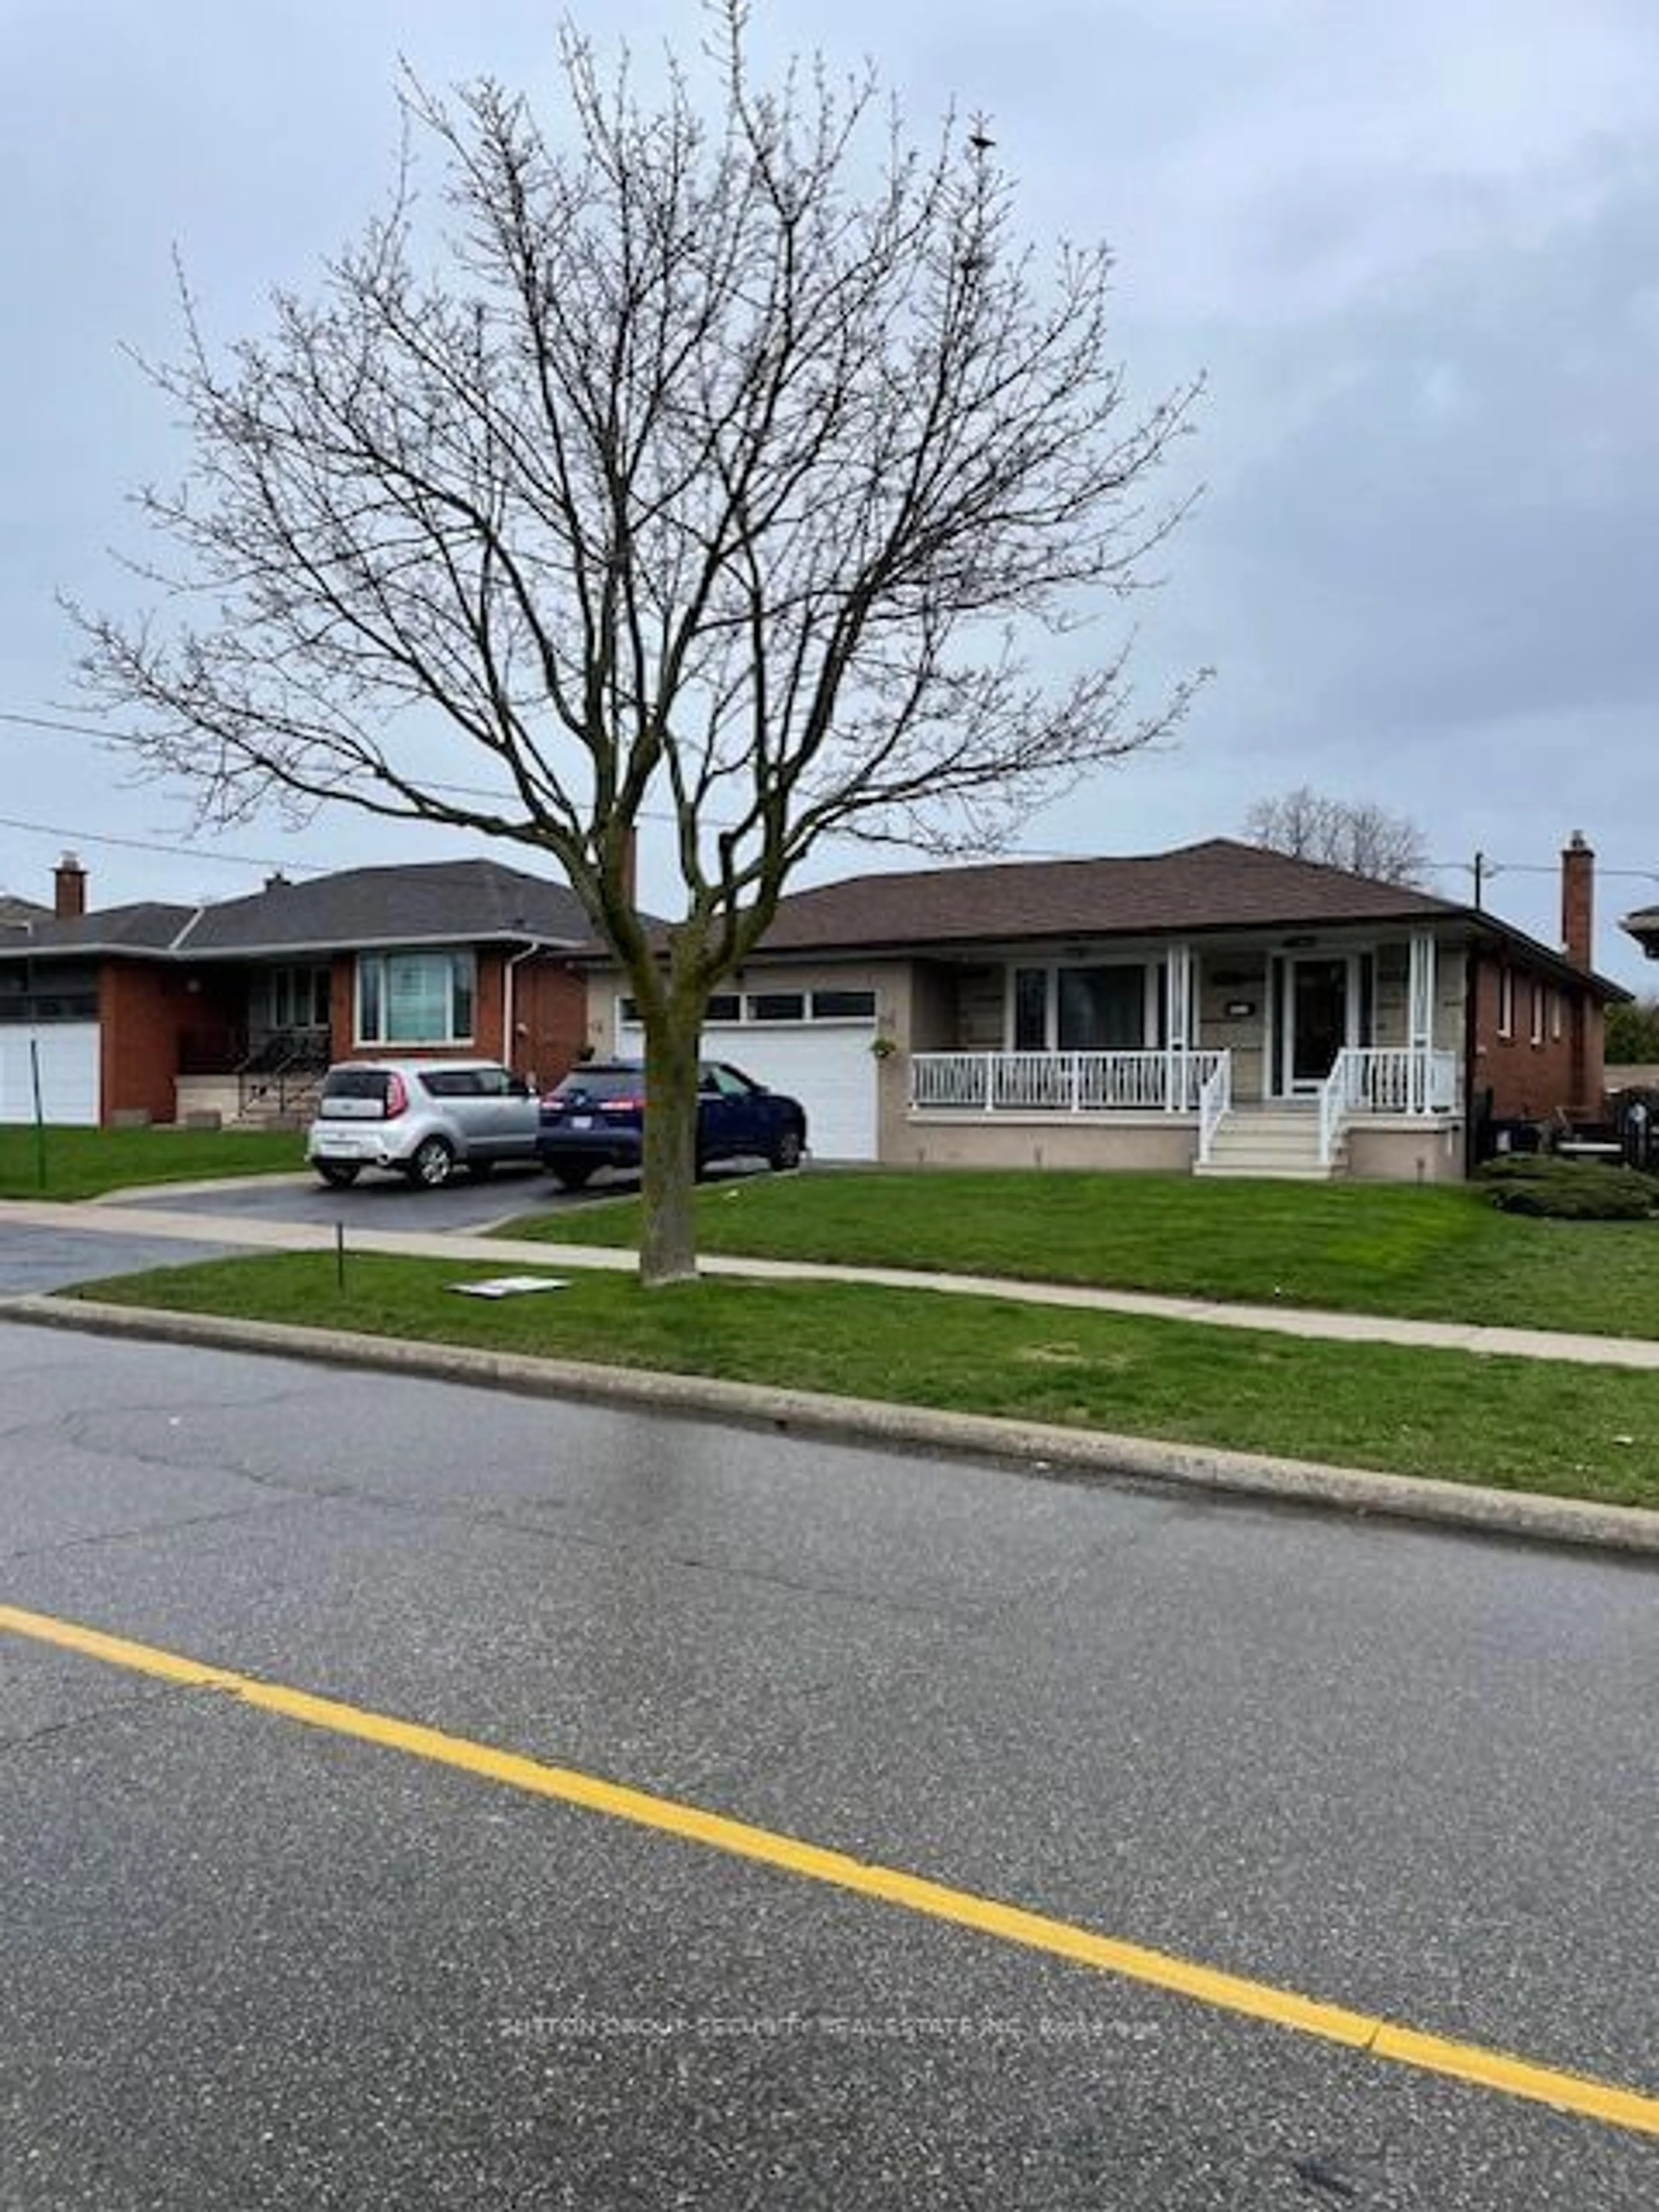 Frontside or backside of a home for 148 Derrydown Rd, Toronto Ontario M3J 1R2